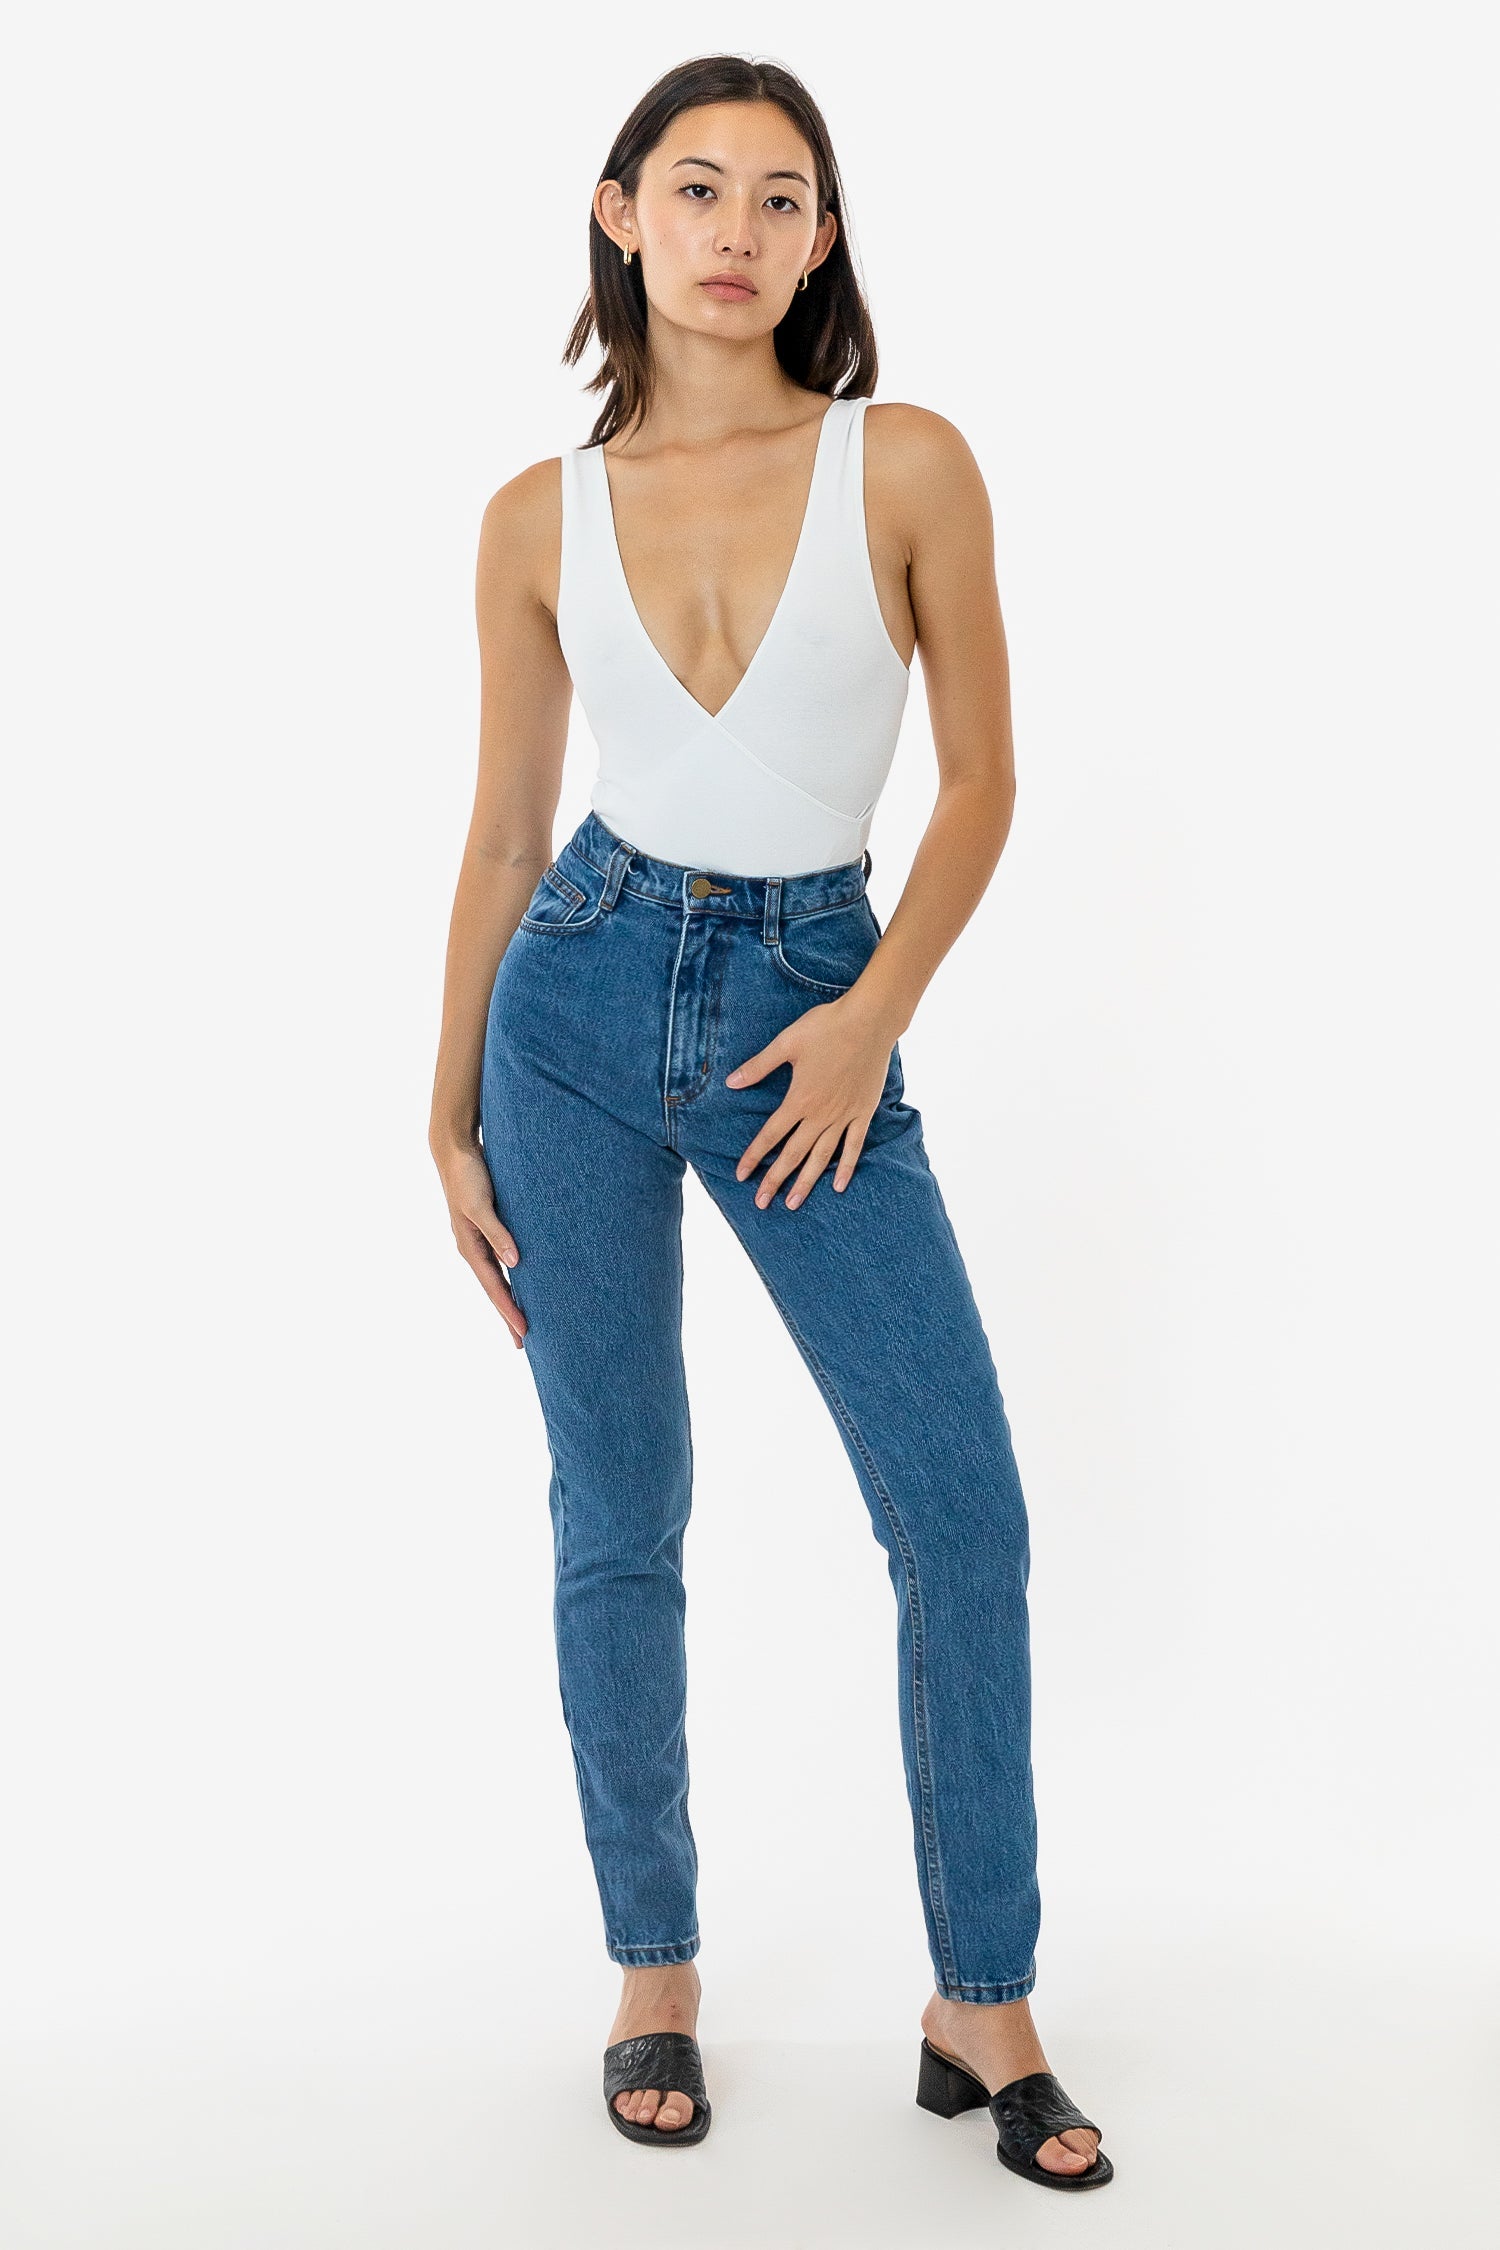 How to Wear High Waisted Jeans? |